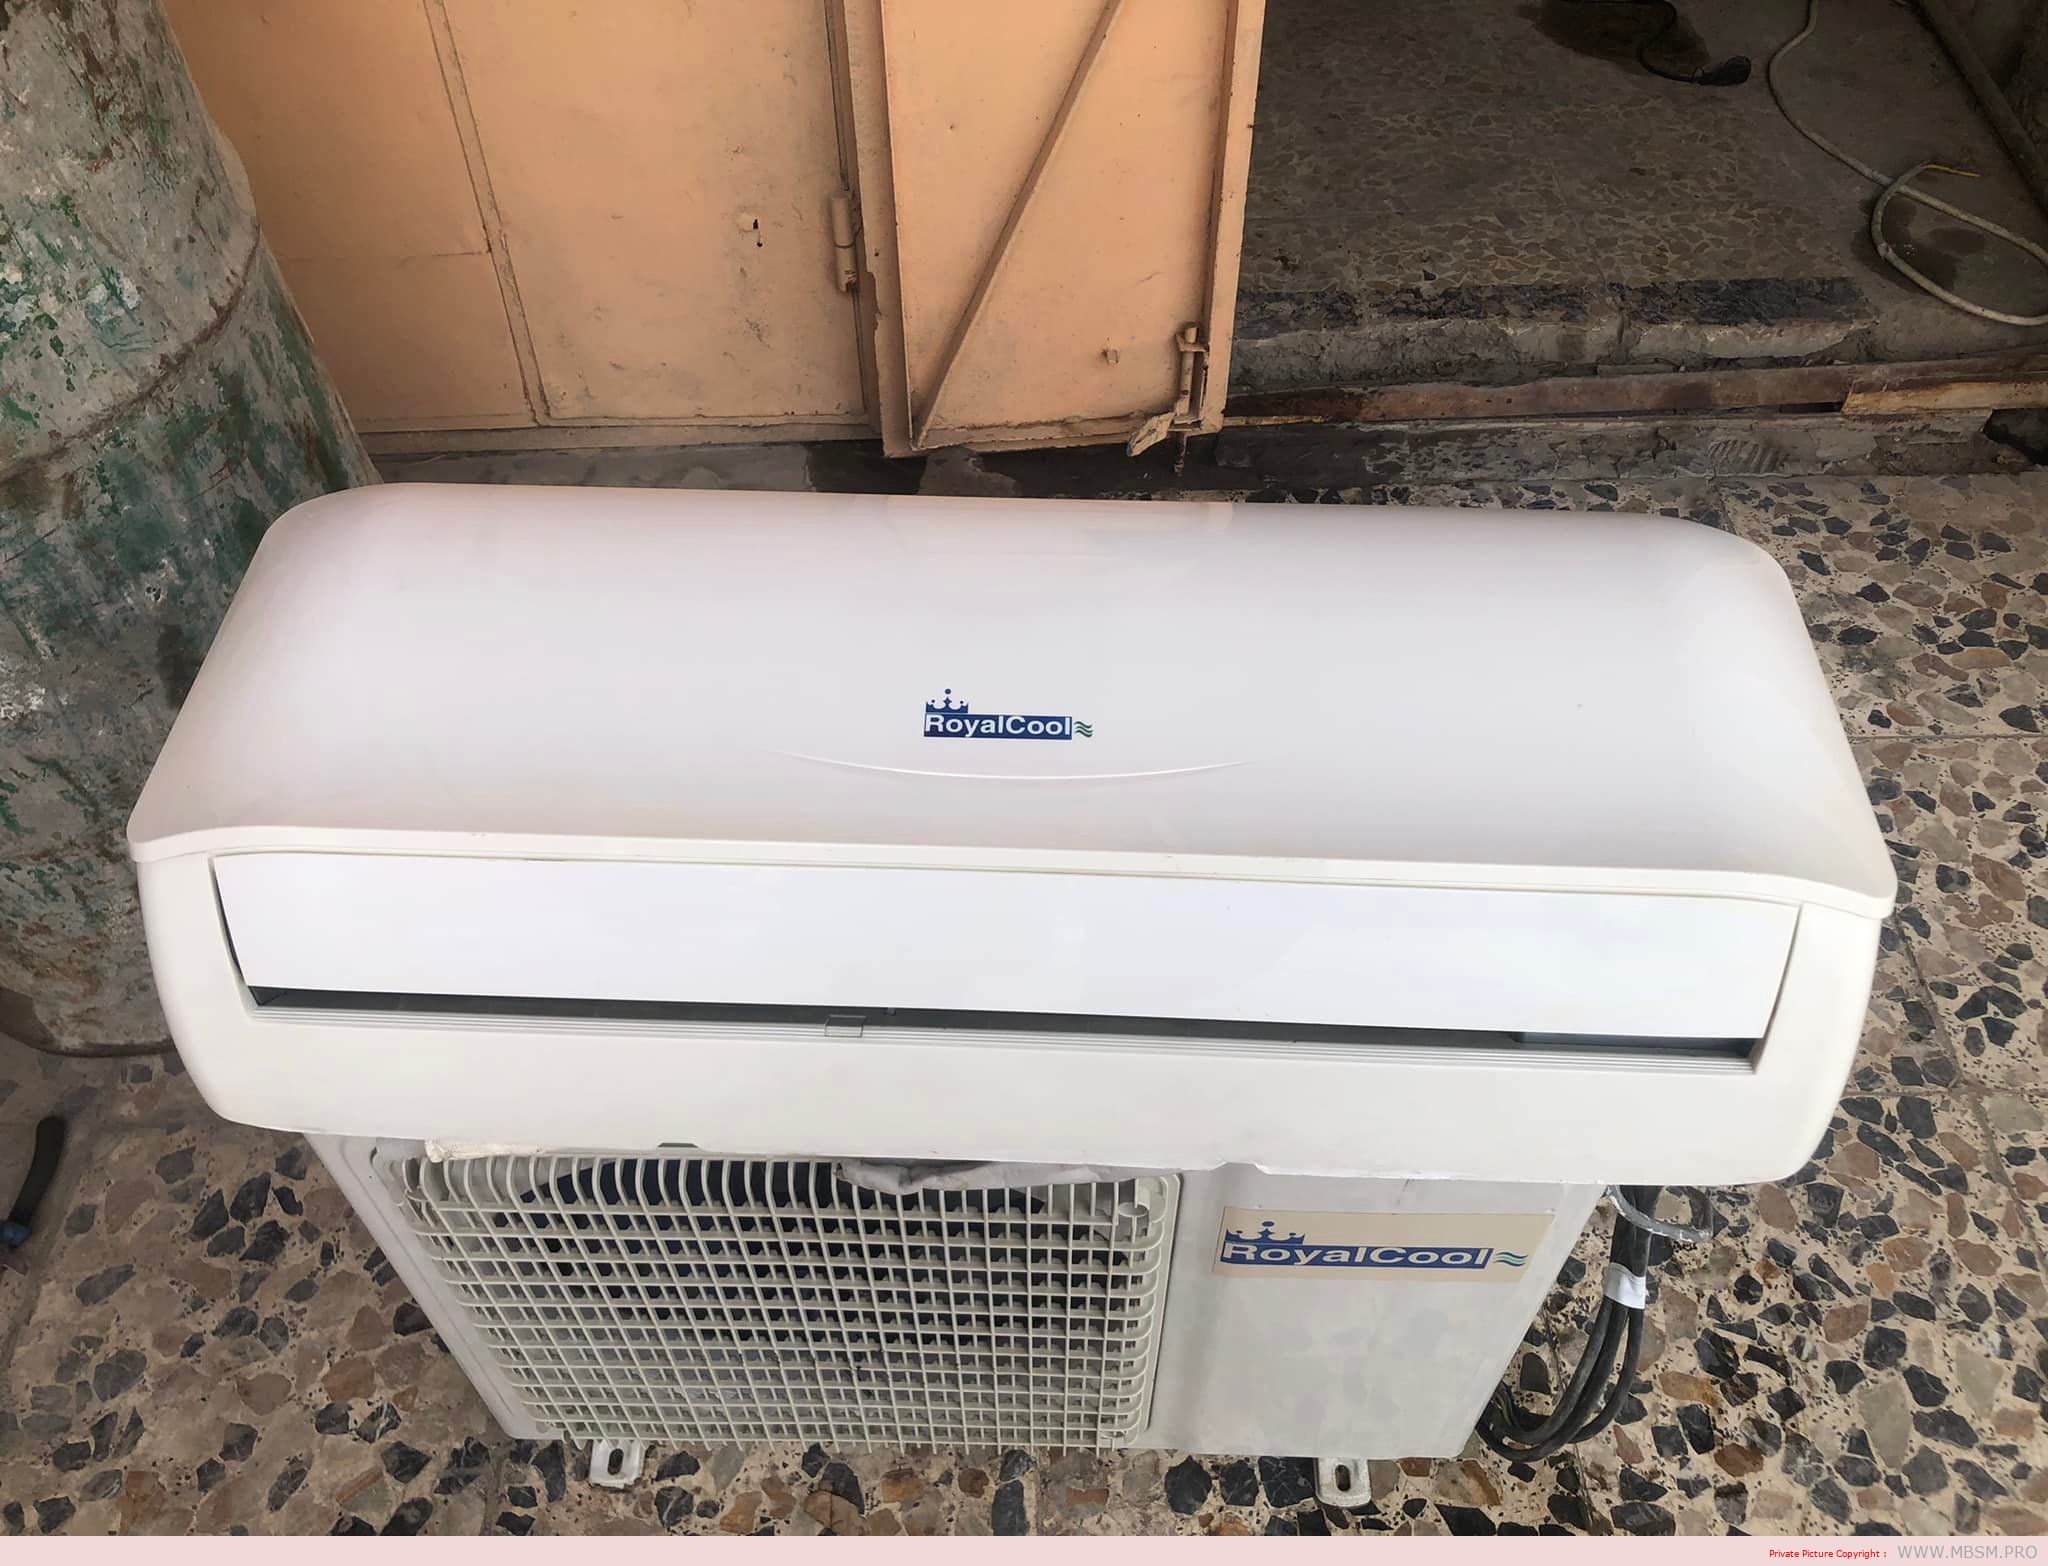 mbsmpro-air-conditioner-royalcool-rcw12ch-rco12ch-12000-btu-cooling-heating-1-ton-mbsm-dot-pro